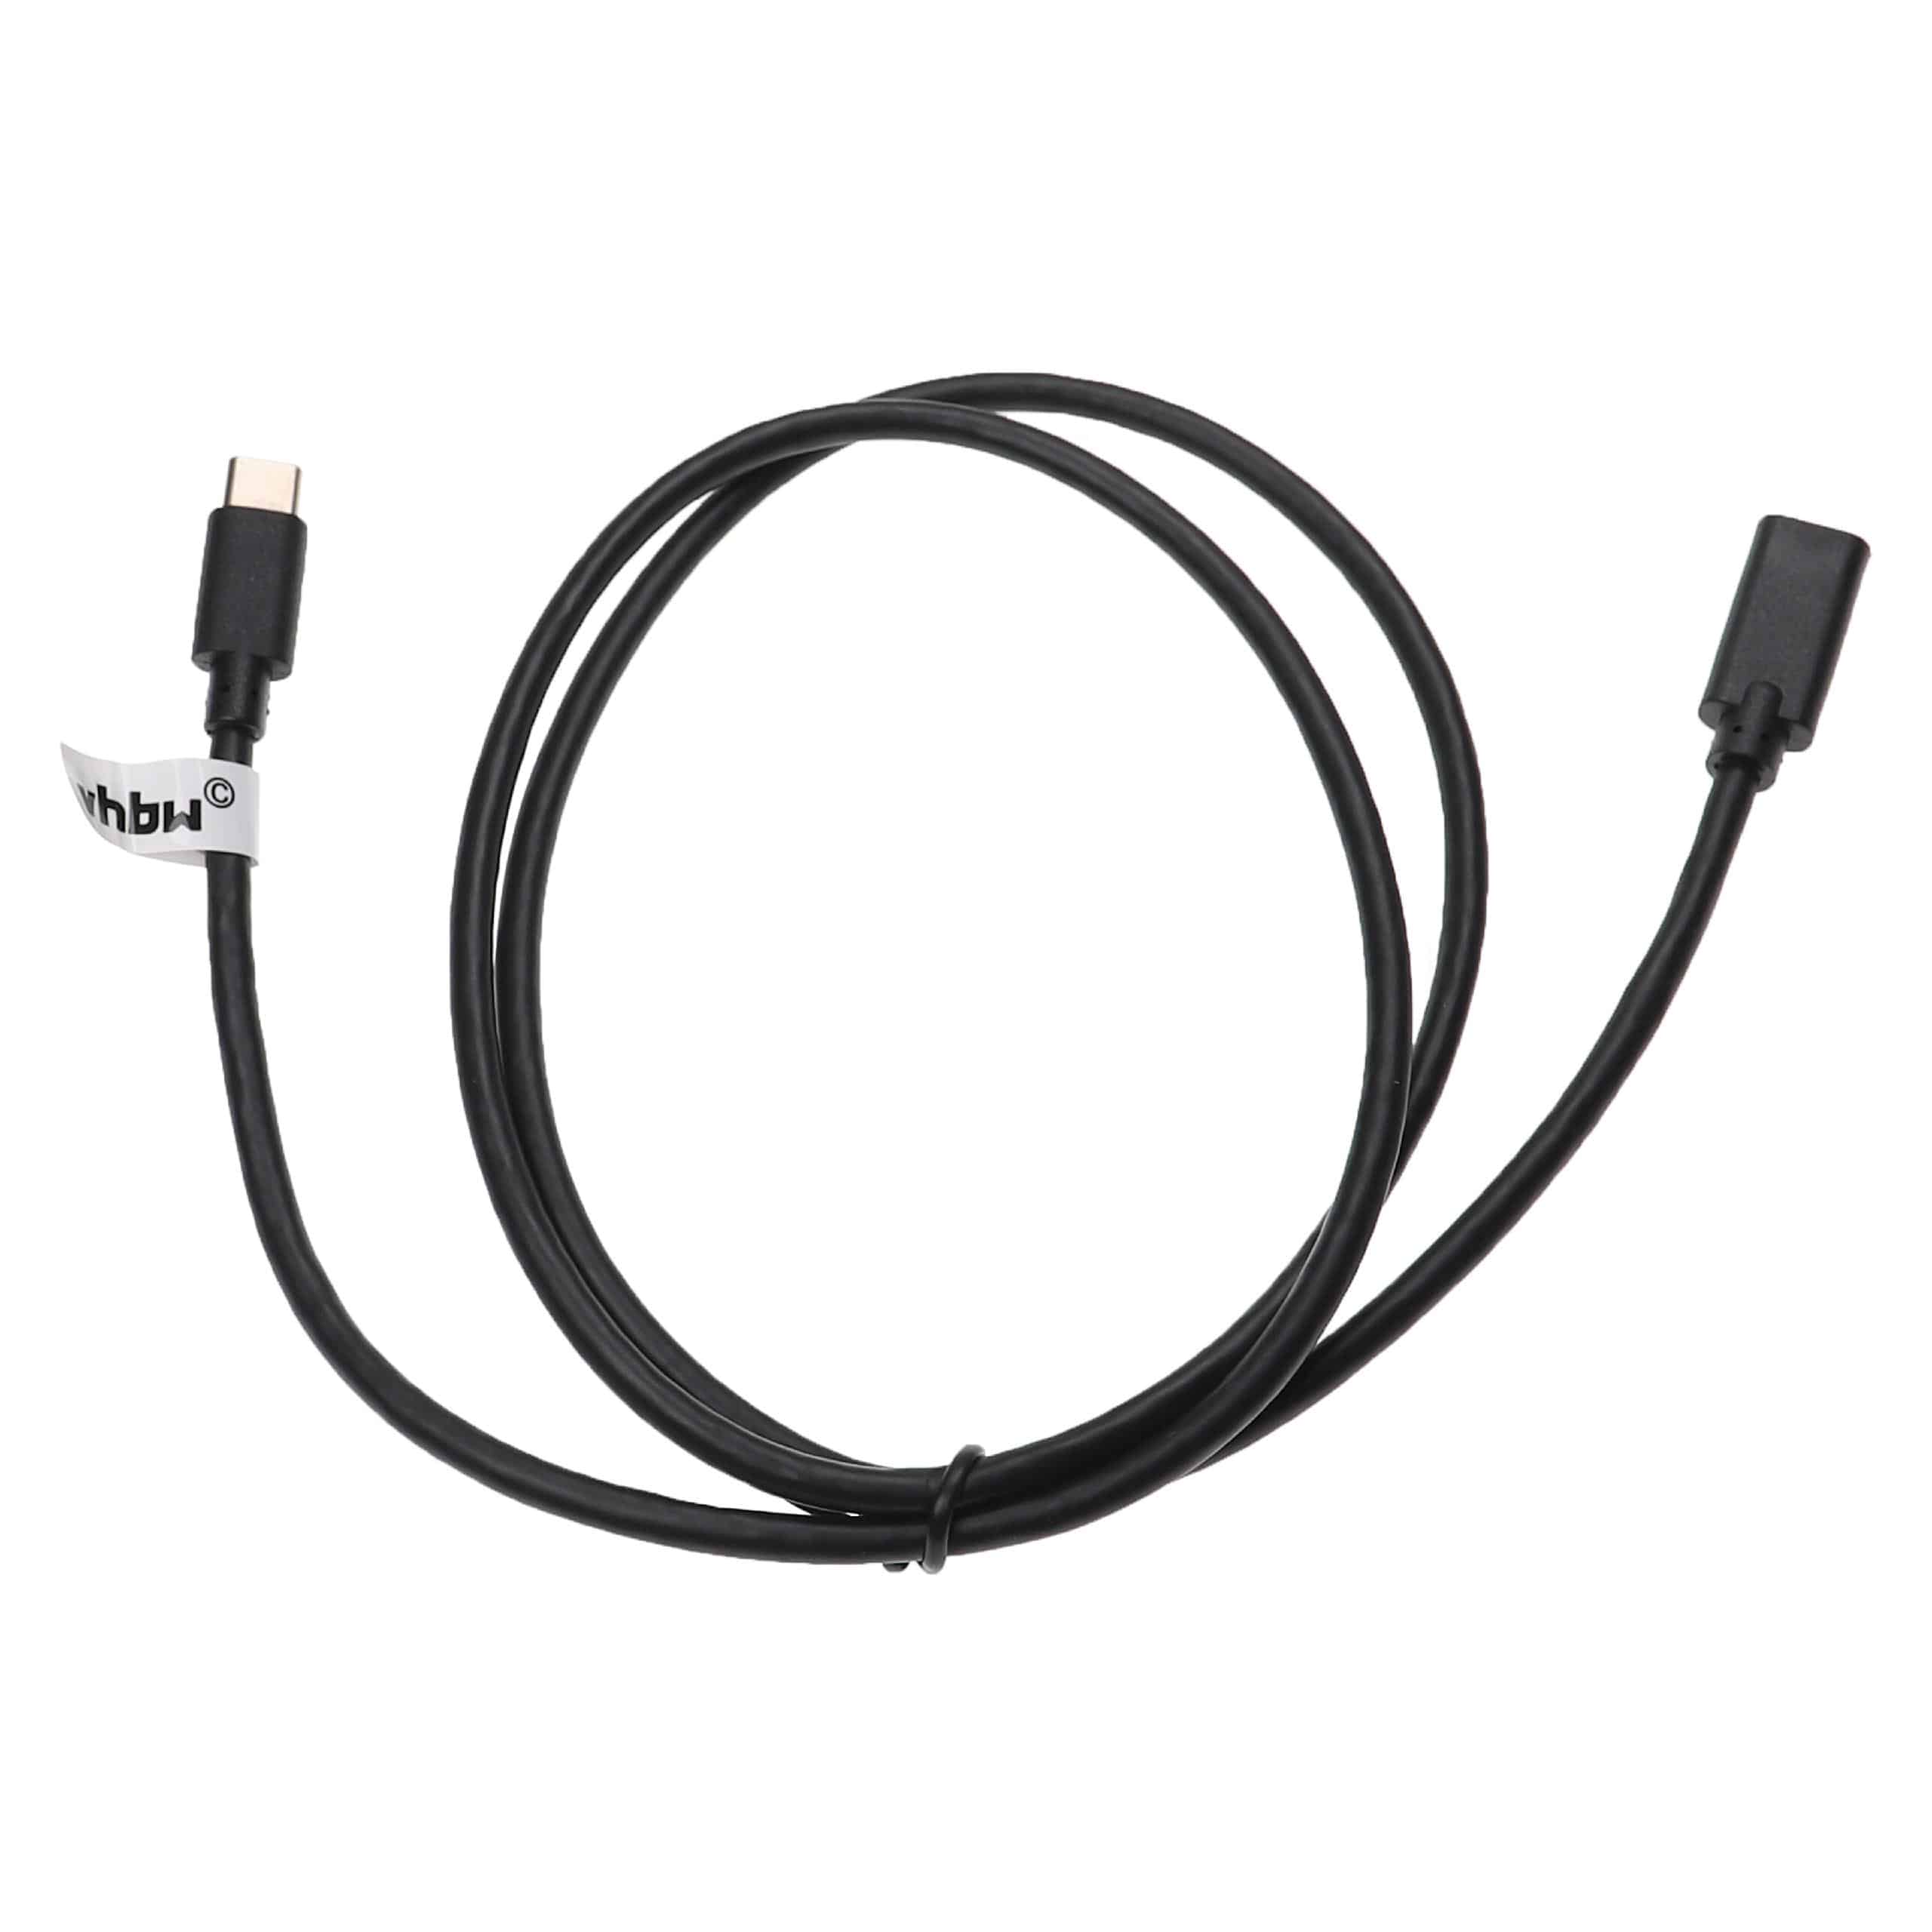 USB C Extension Cable for various Tablets, Notebooks, Smartphones, PCs - 1 m Black, USB 3.1 C Cable